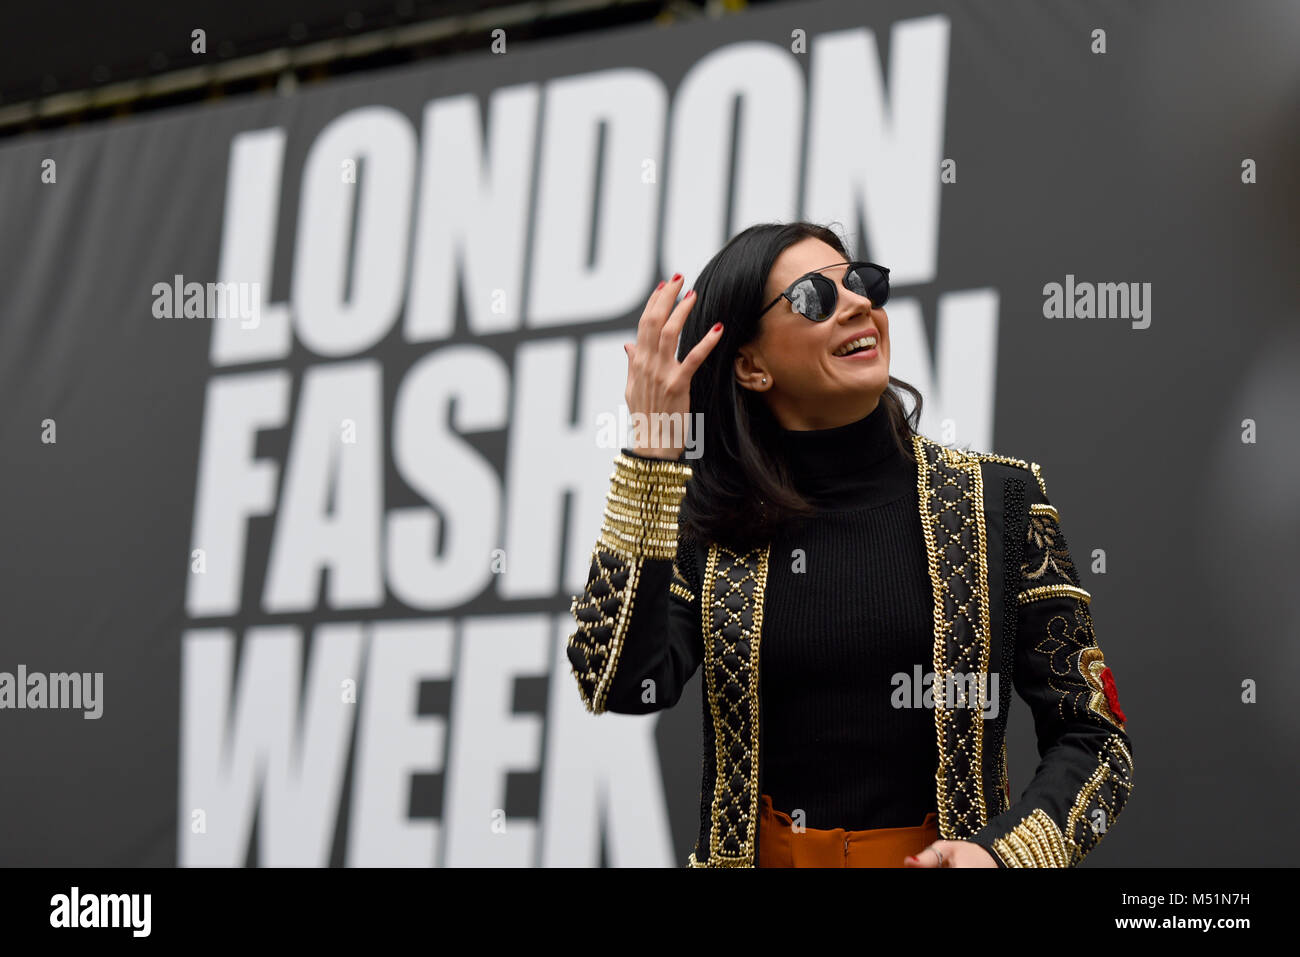 Model posing by London Fashion Week sign. Female. Girl. Woman. Fashionable clothing. Outfit. The Store, Strand, London, UK. Space for copy Stock Photo